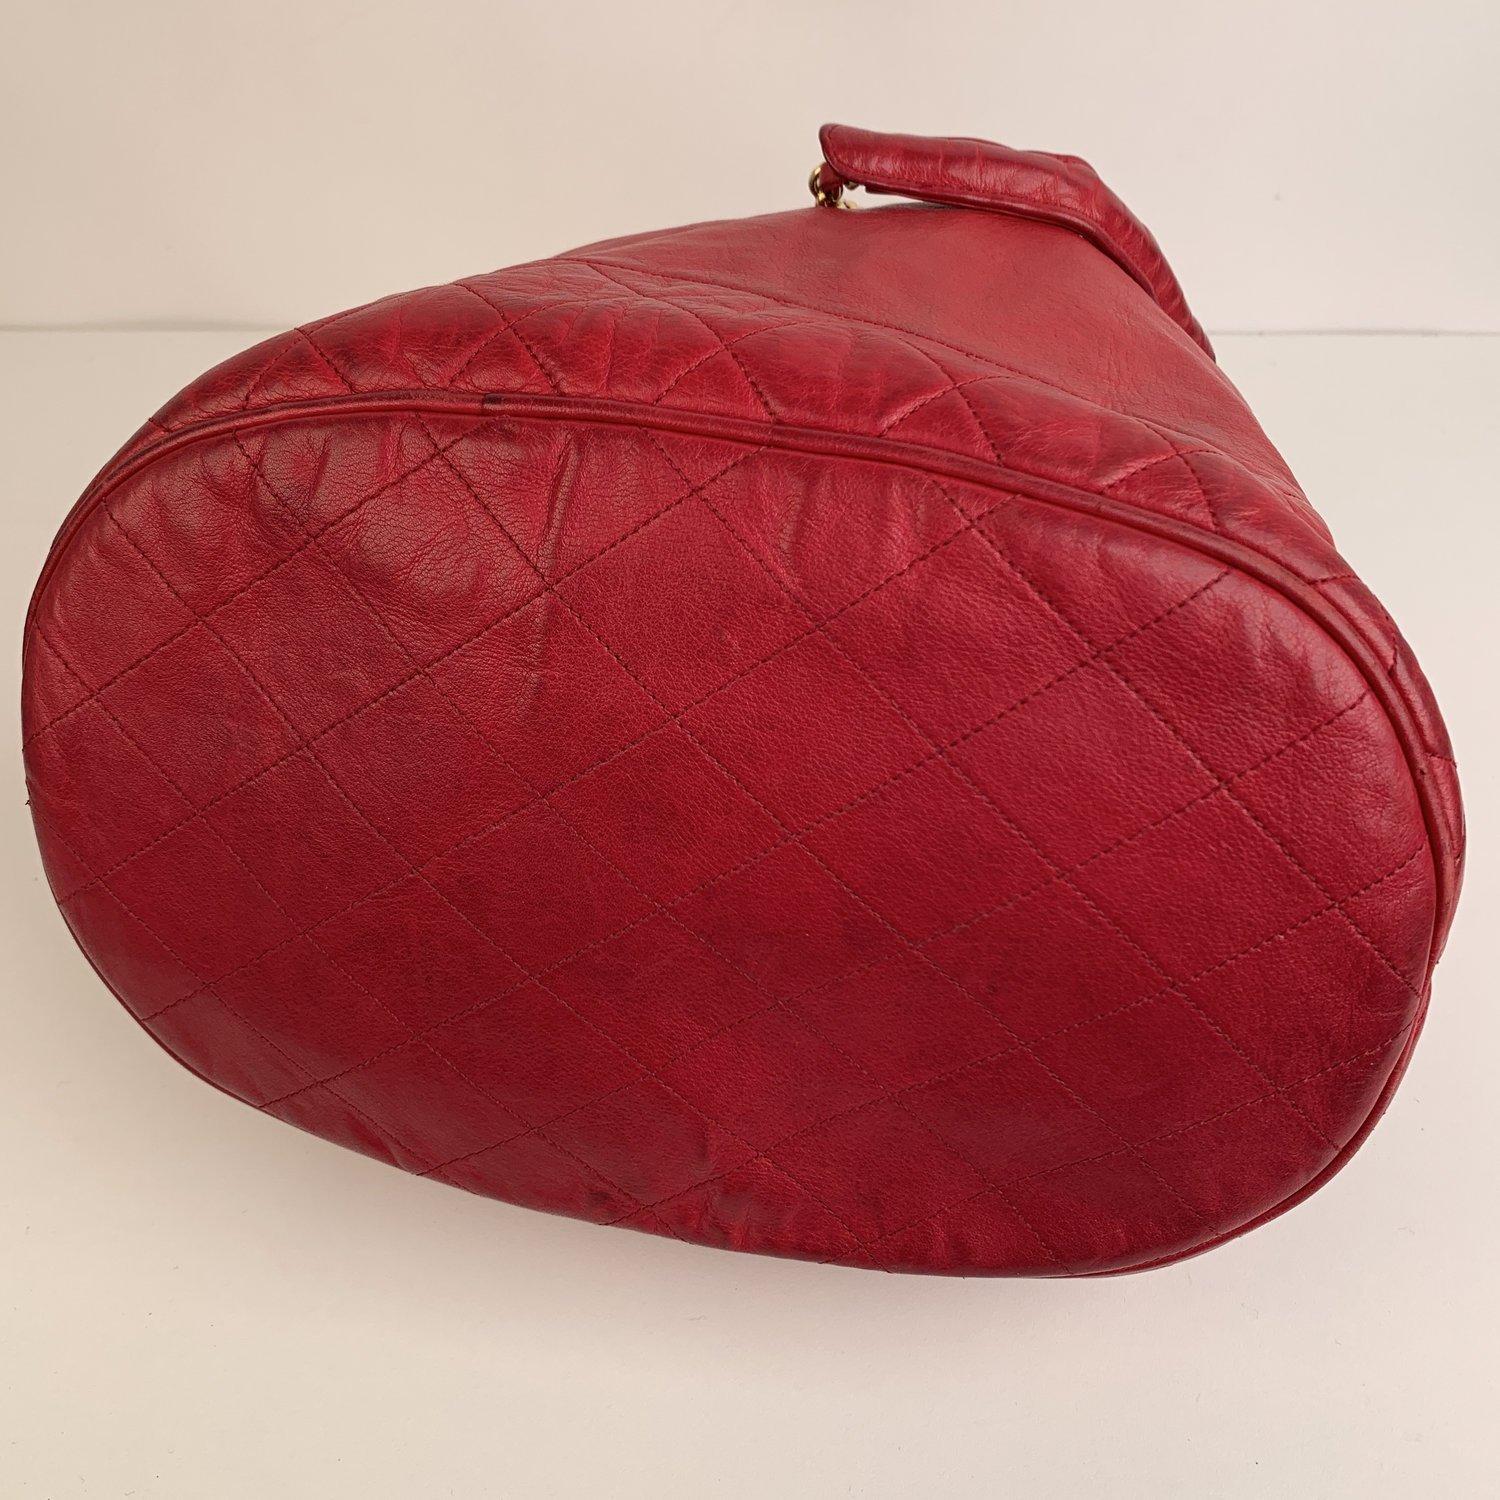 Chanel Vintage Red Leather Bucket Shoulder Bag with Bottom Quilting 2